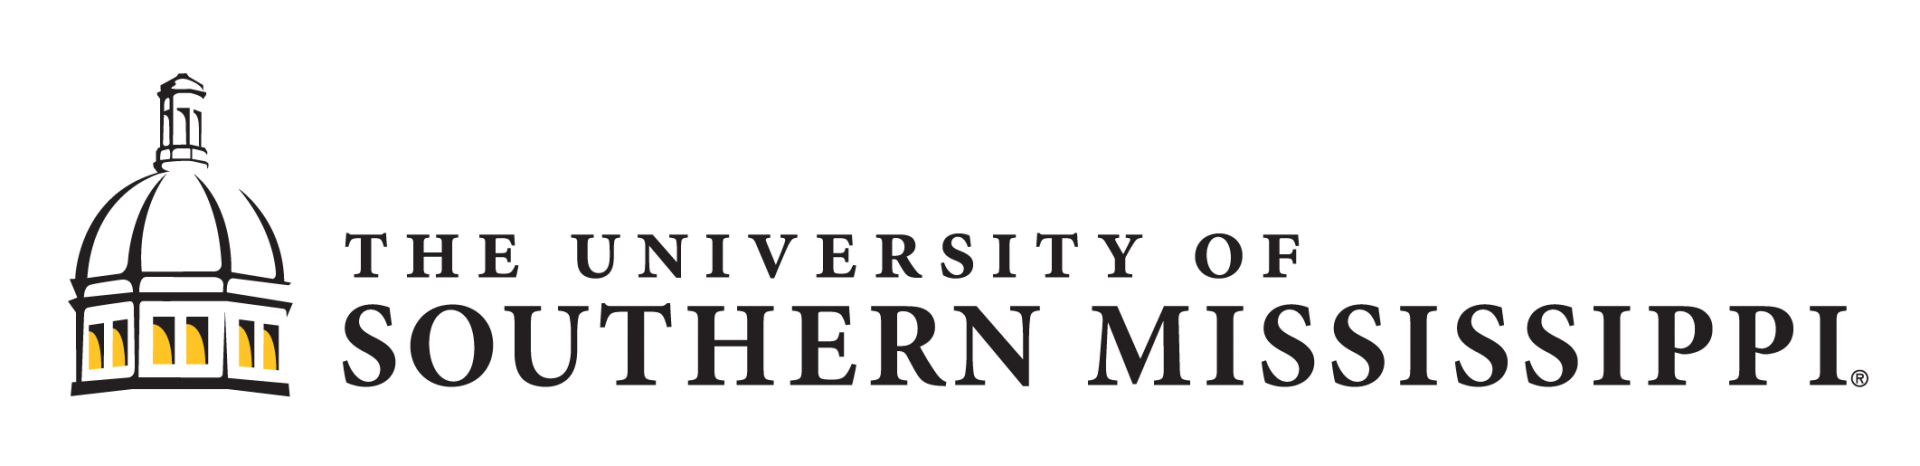 Horizontal logo for The University of Southern Mississippi